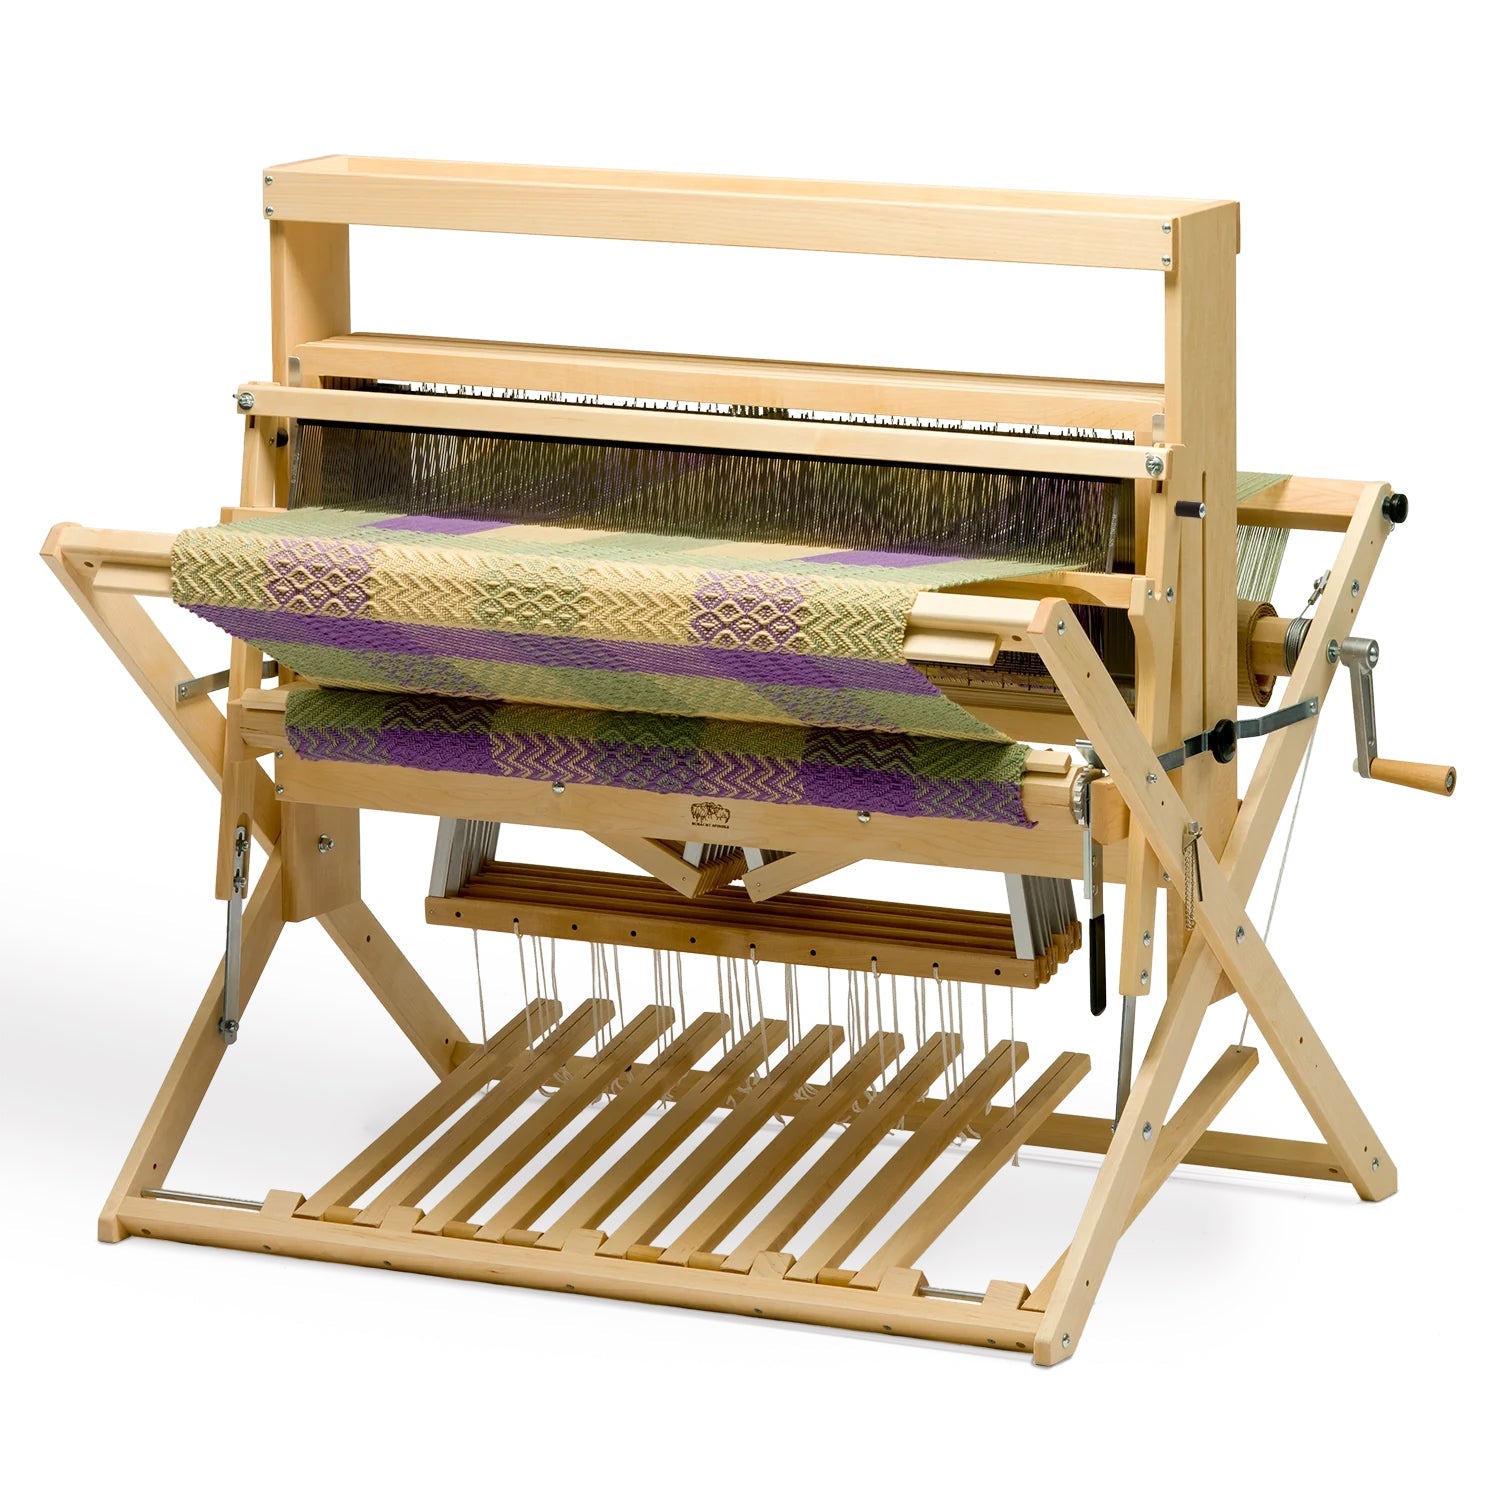 Schacht Spindle Company Weaving Schacht Mighty Wolf Loom - 8 shaft, 36"